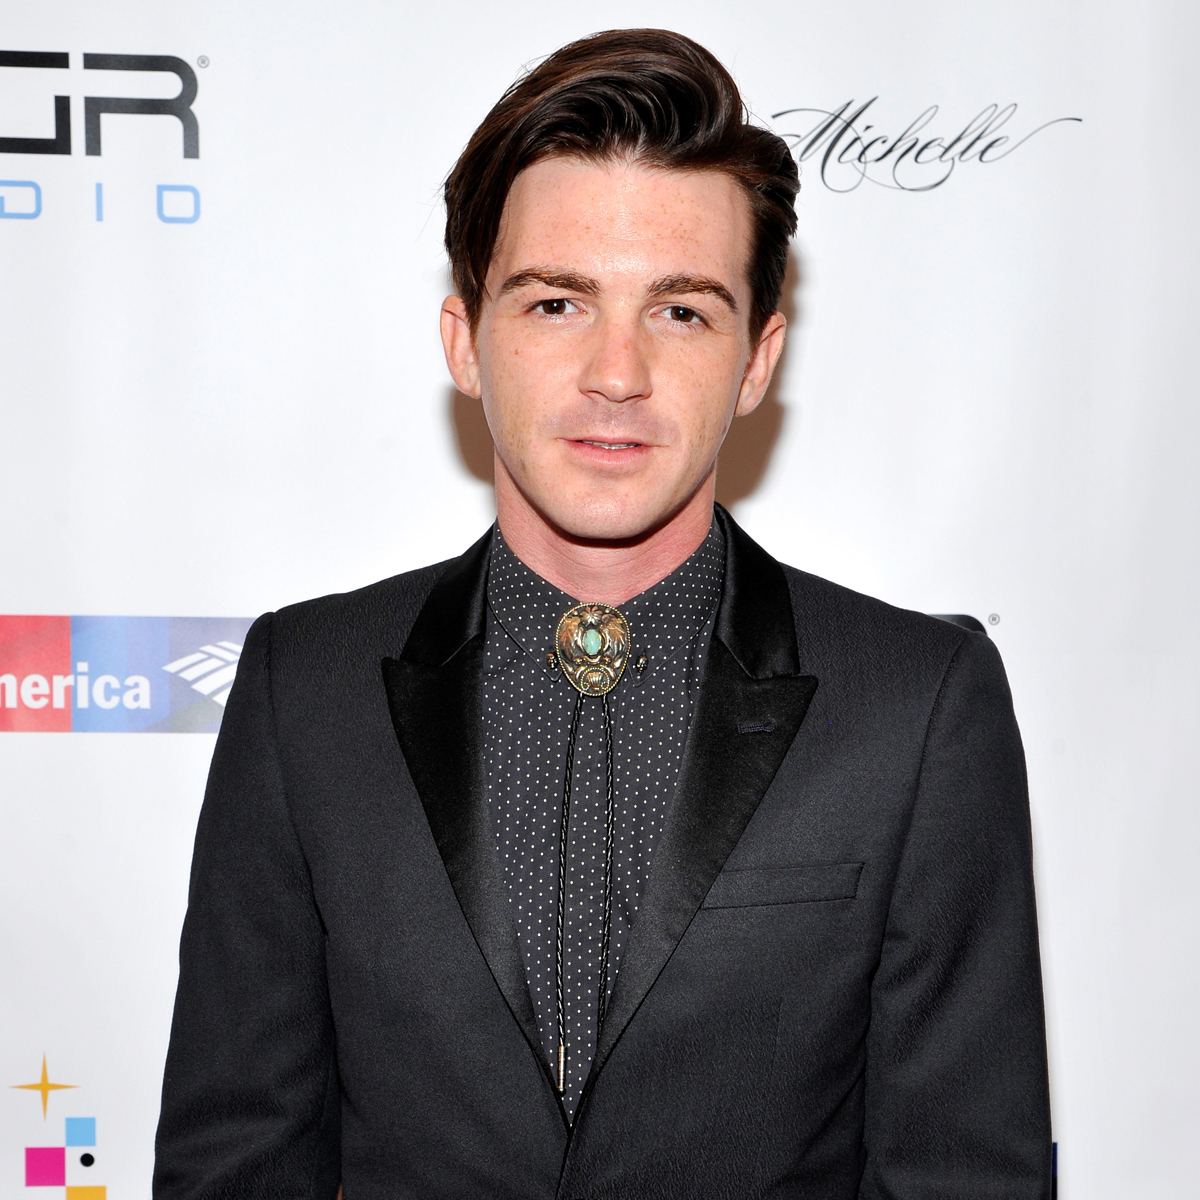 Drake Bell Made Suicidal Statements Before Disappearing: Police Report